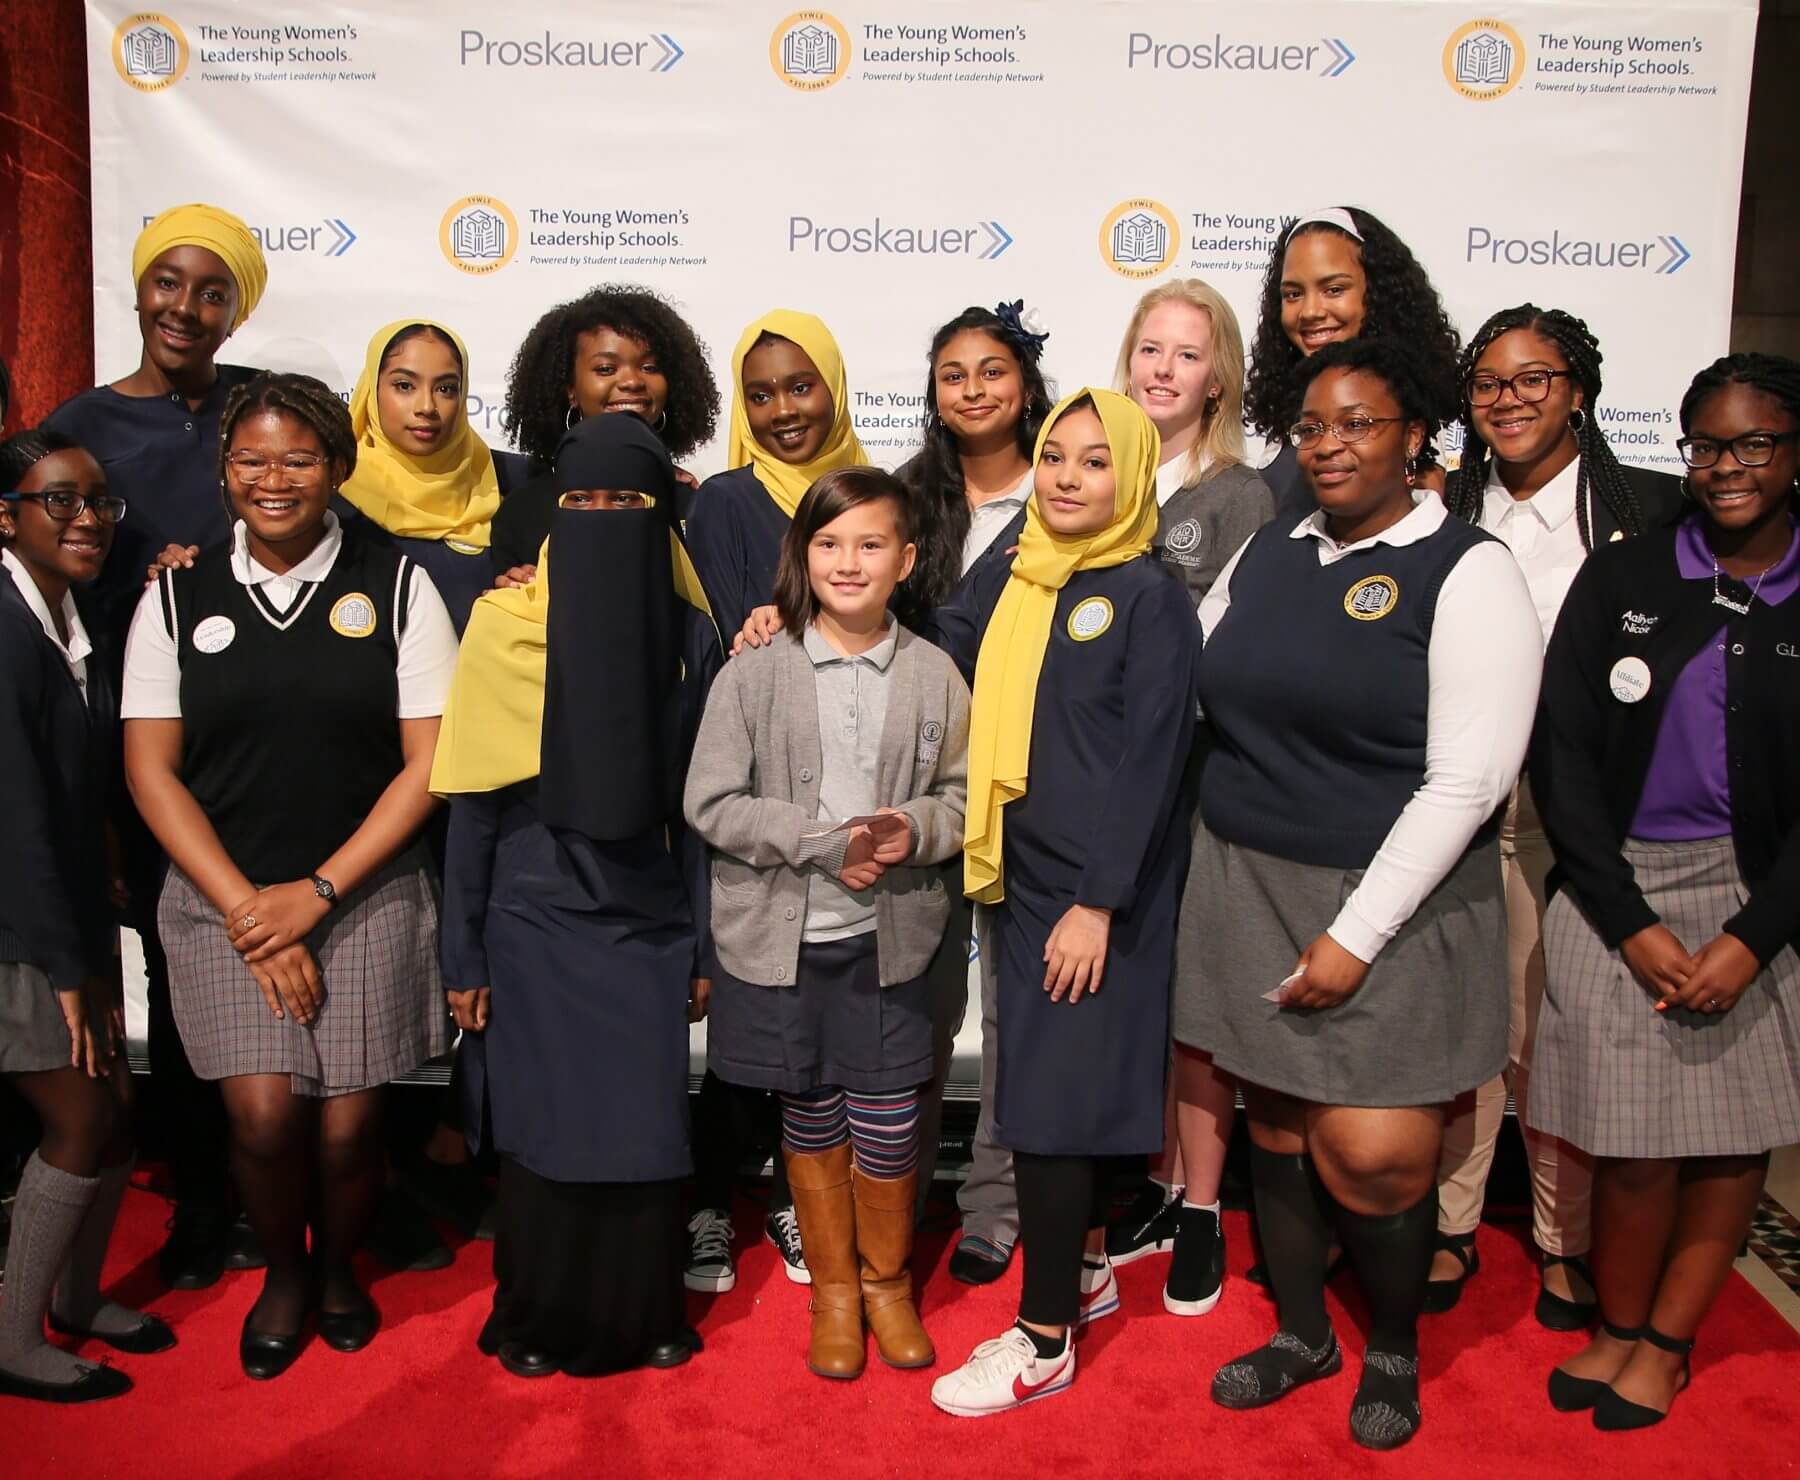 Group of smiling girls wearing a variety of school uniforms stand in front of a step and repeat with logos for The Young Women's Leadership Schools and Proskauer